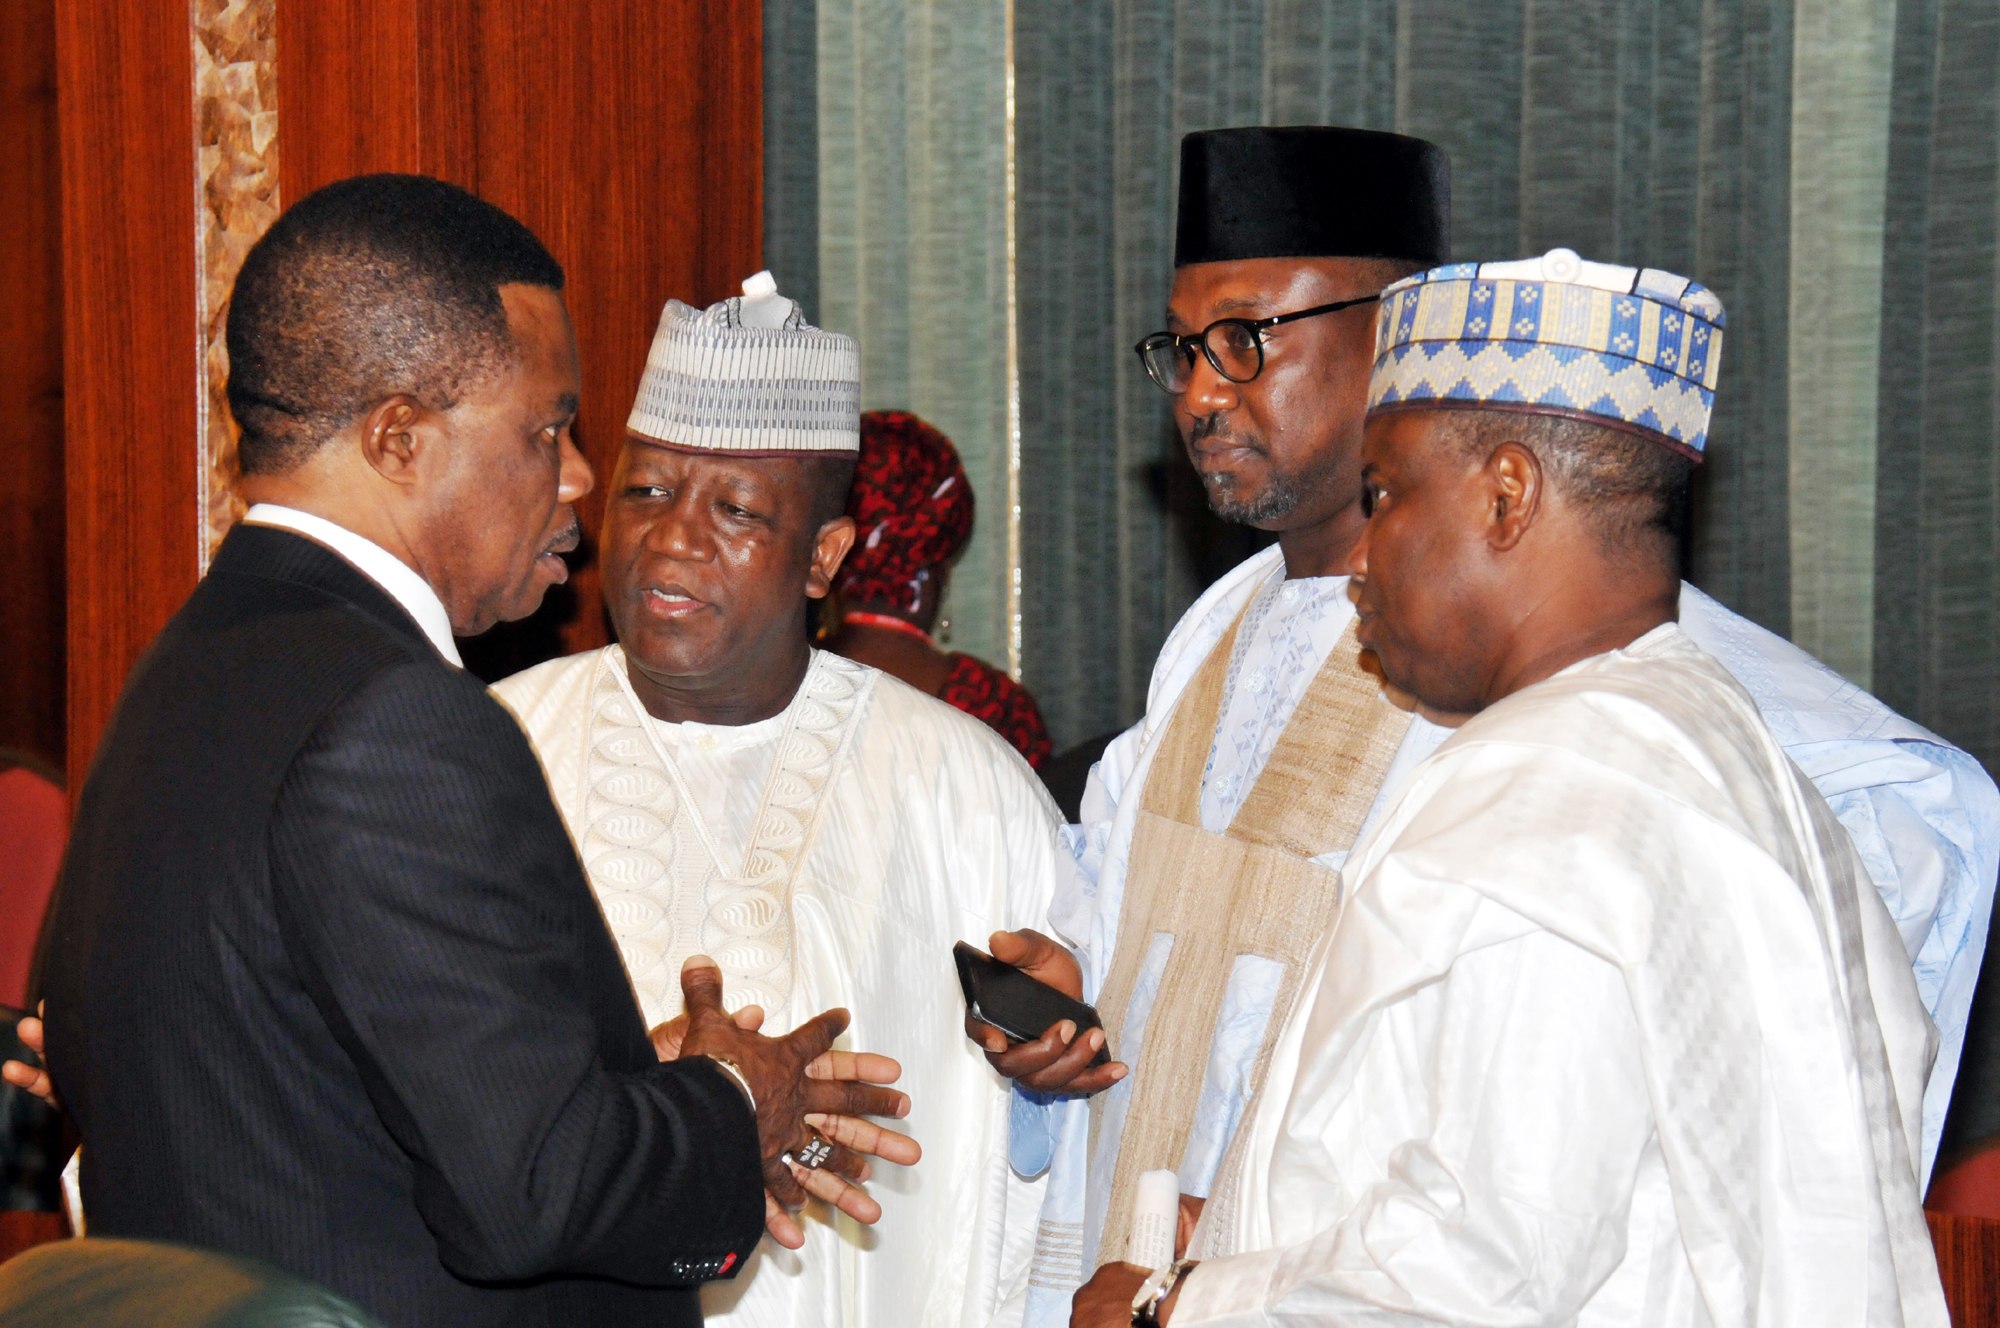 Some Governors of Nigeria deliberating during one of their meetings